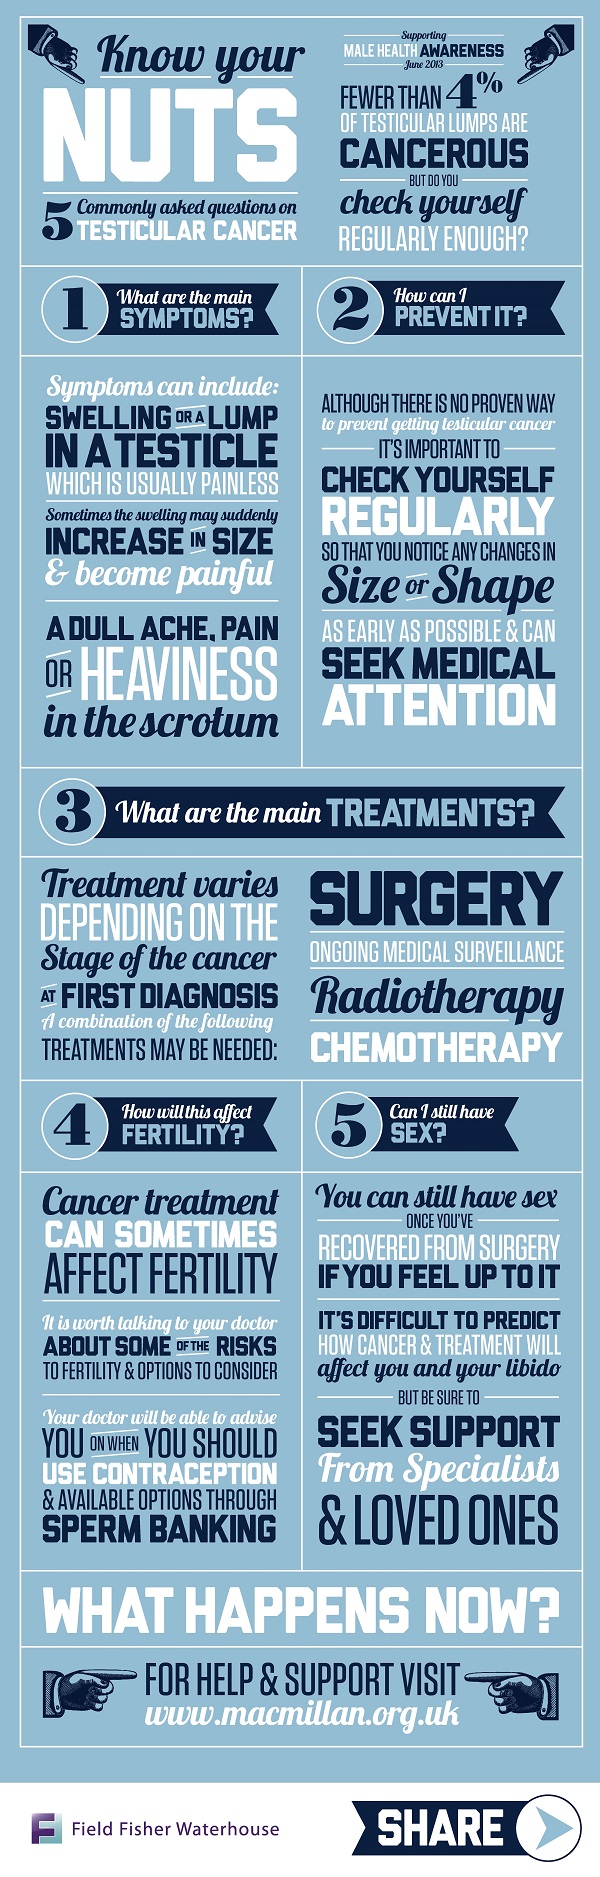 testicular cancer infographic